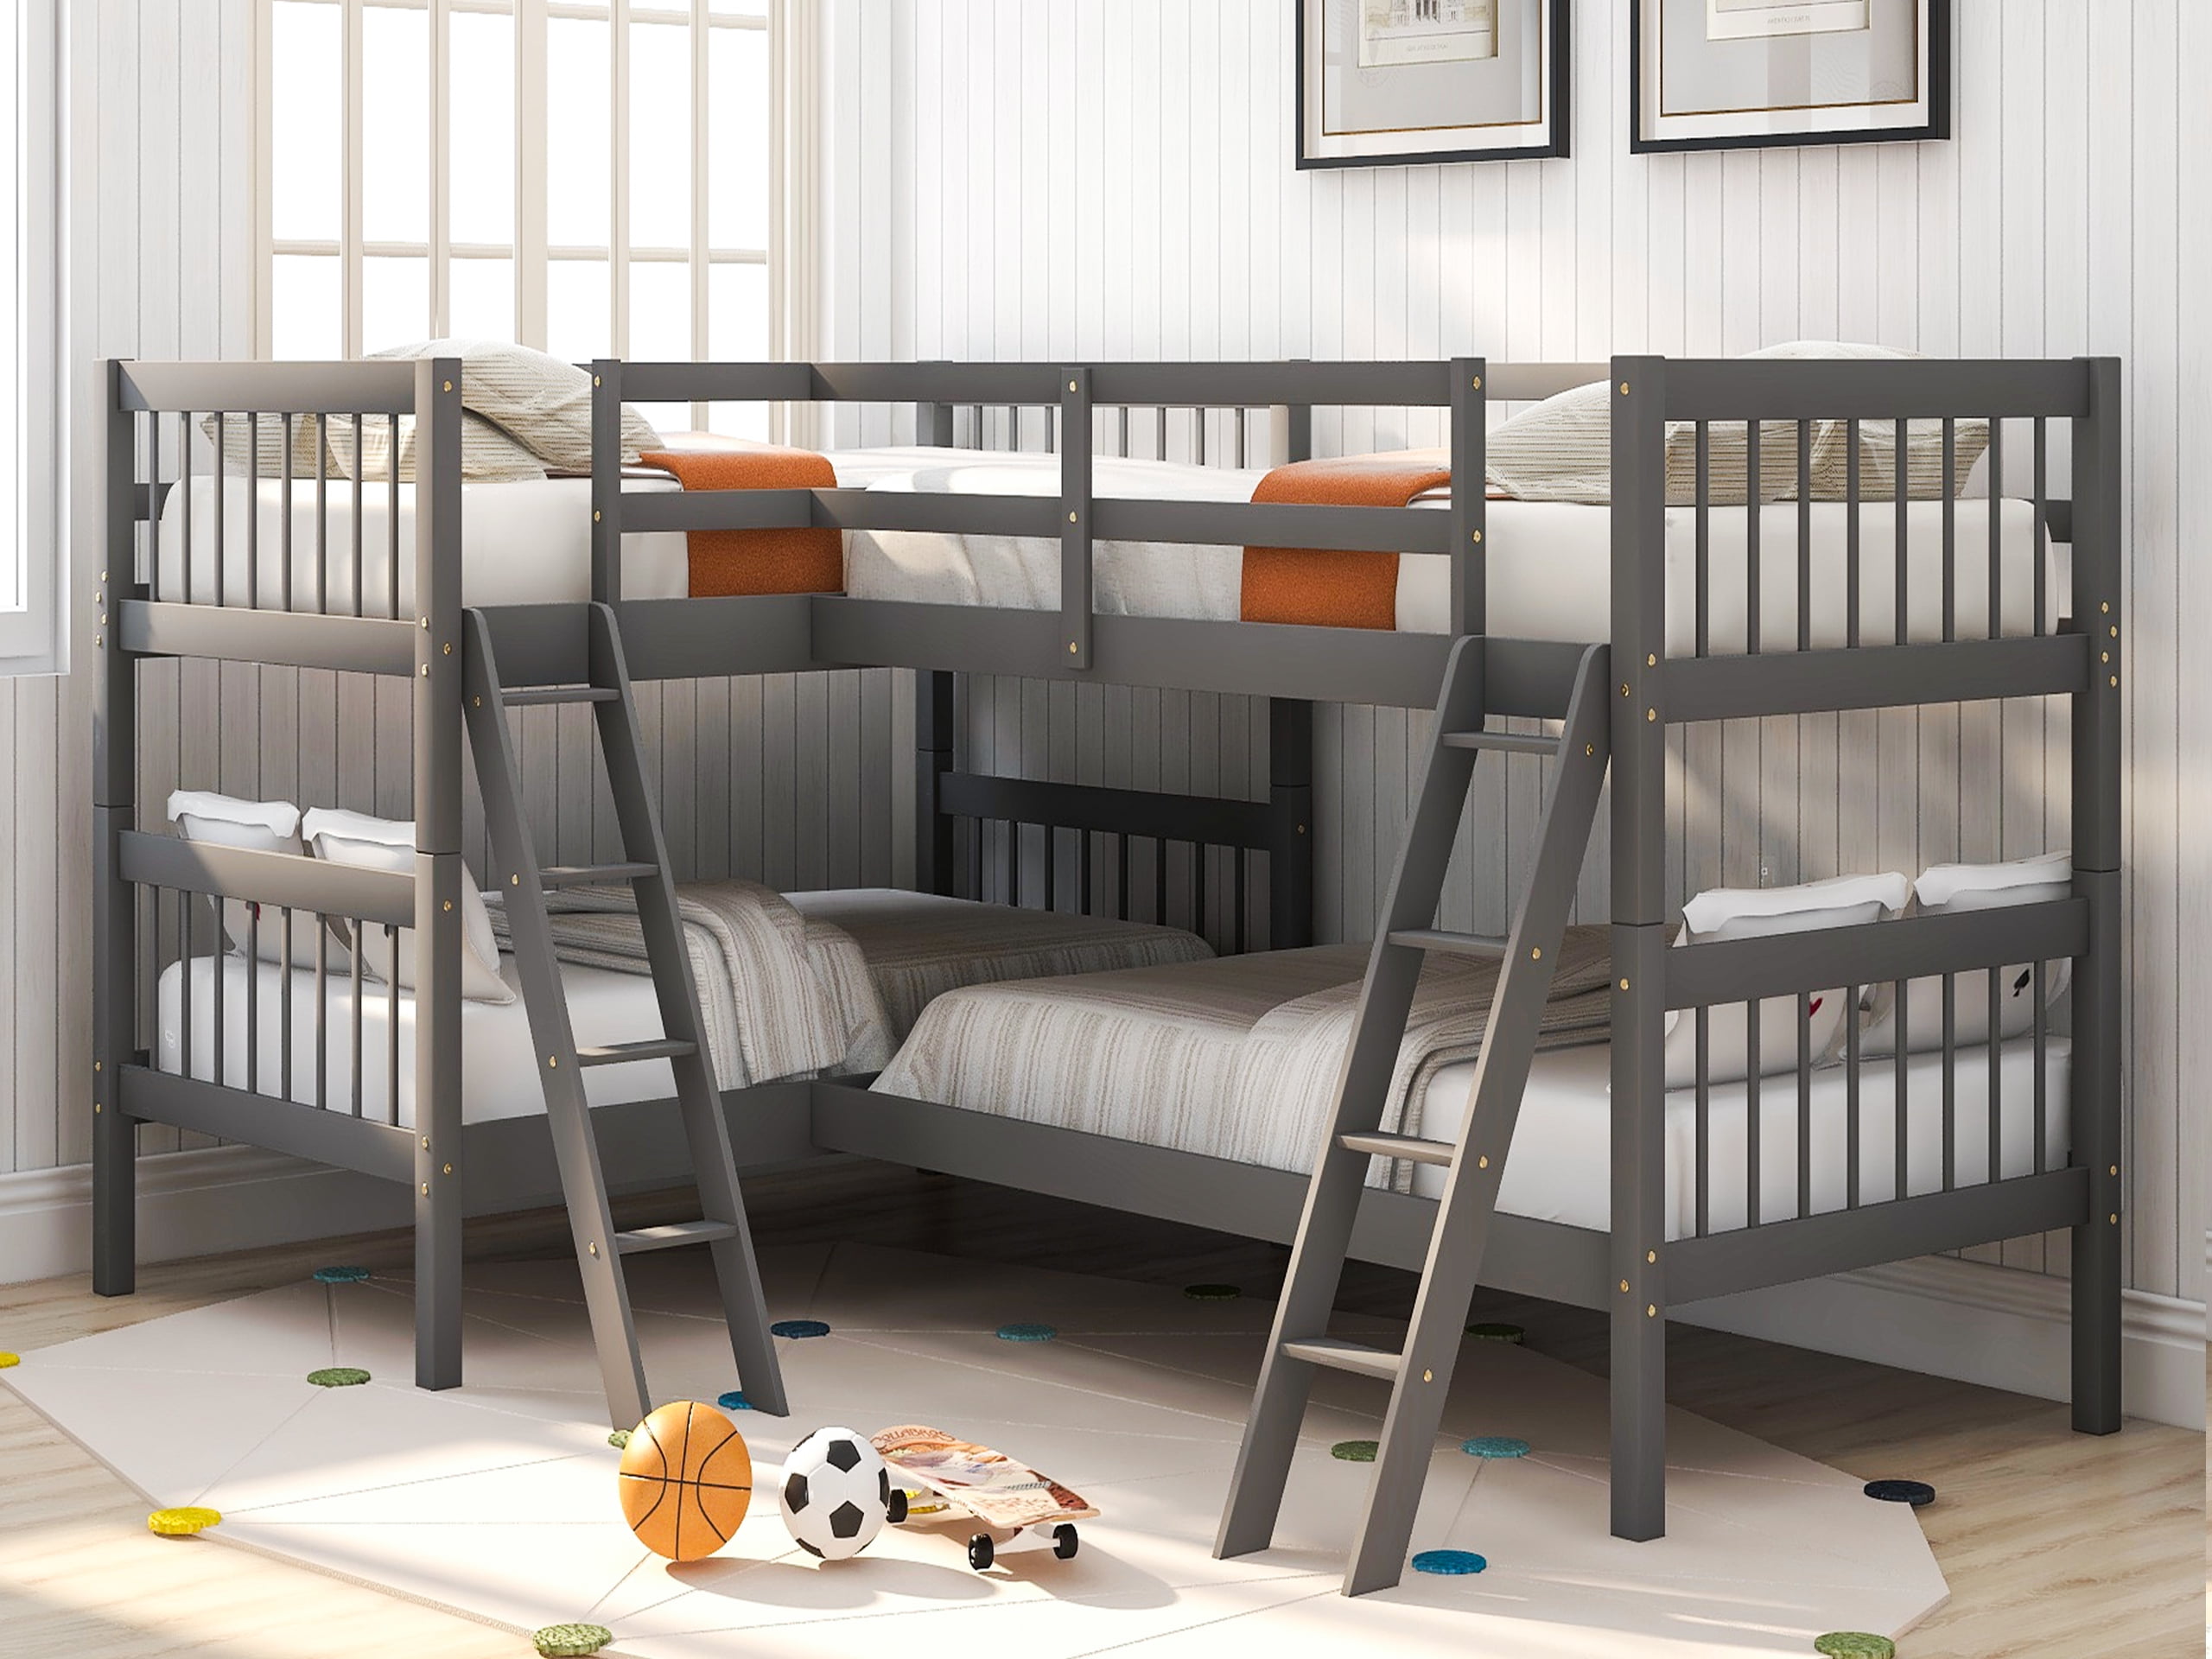 L Shaped Bunk Bed Twin Size Four Kids, Cot Bunk Beds For Twins